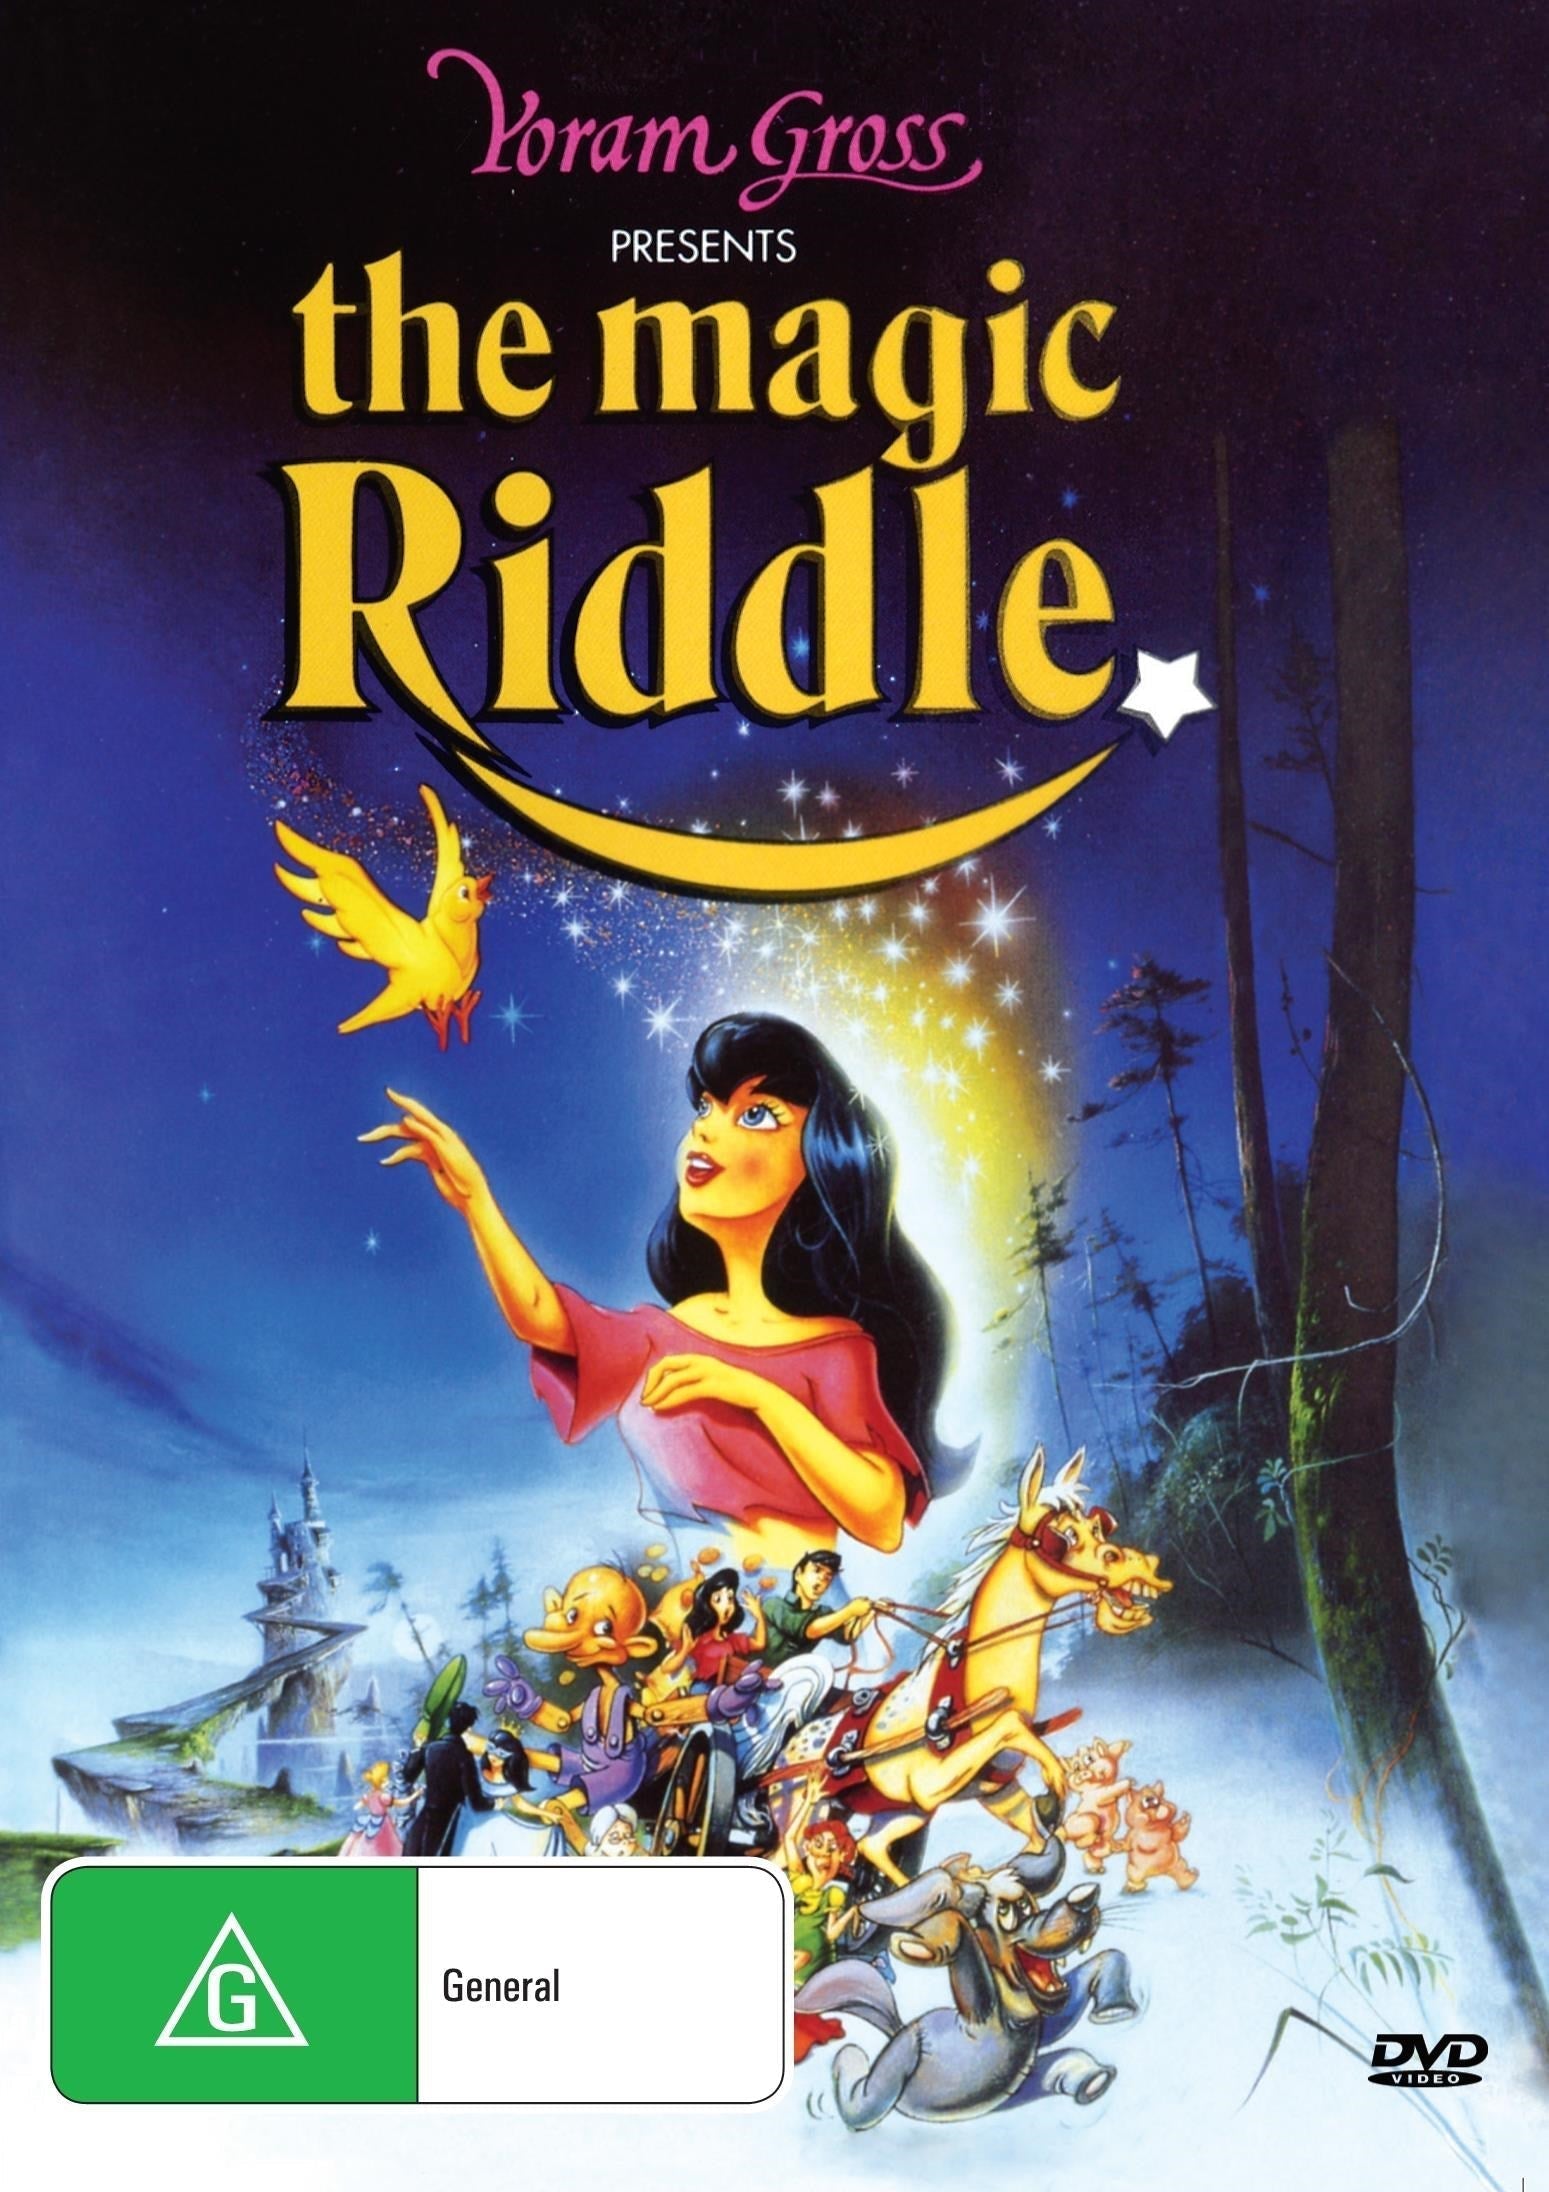 The Magic Riddle rareandcollectibledvds